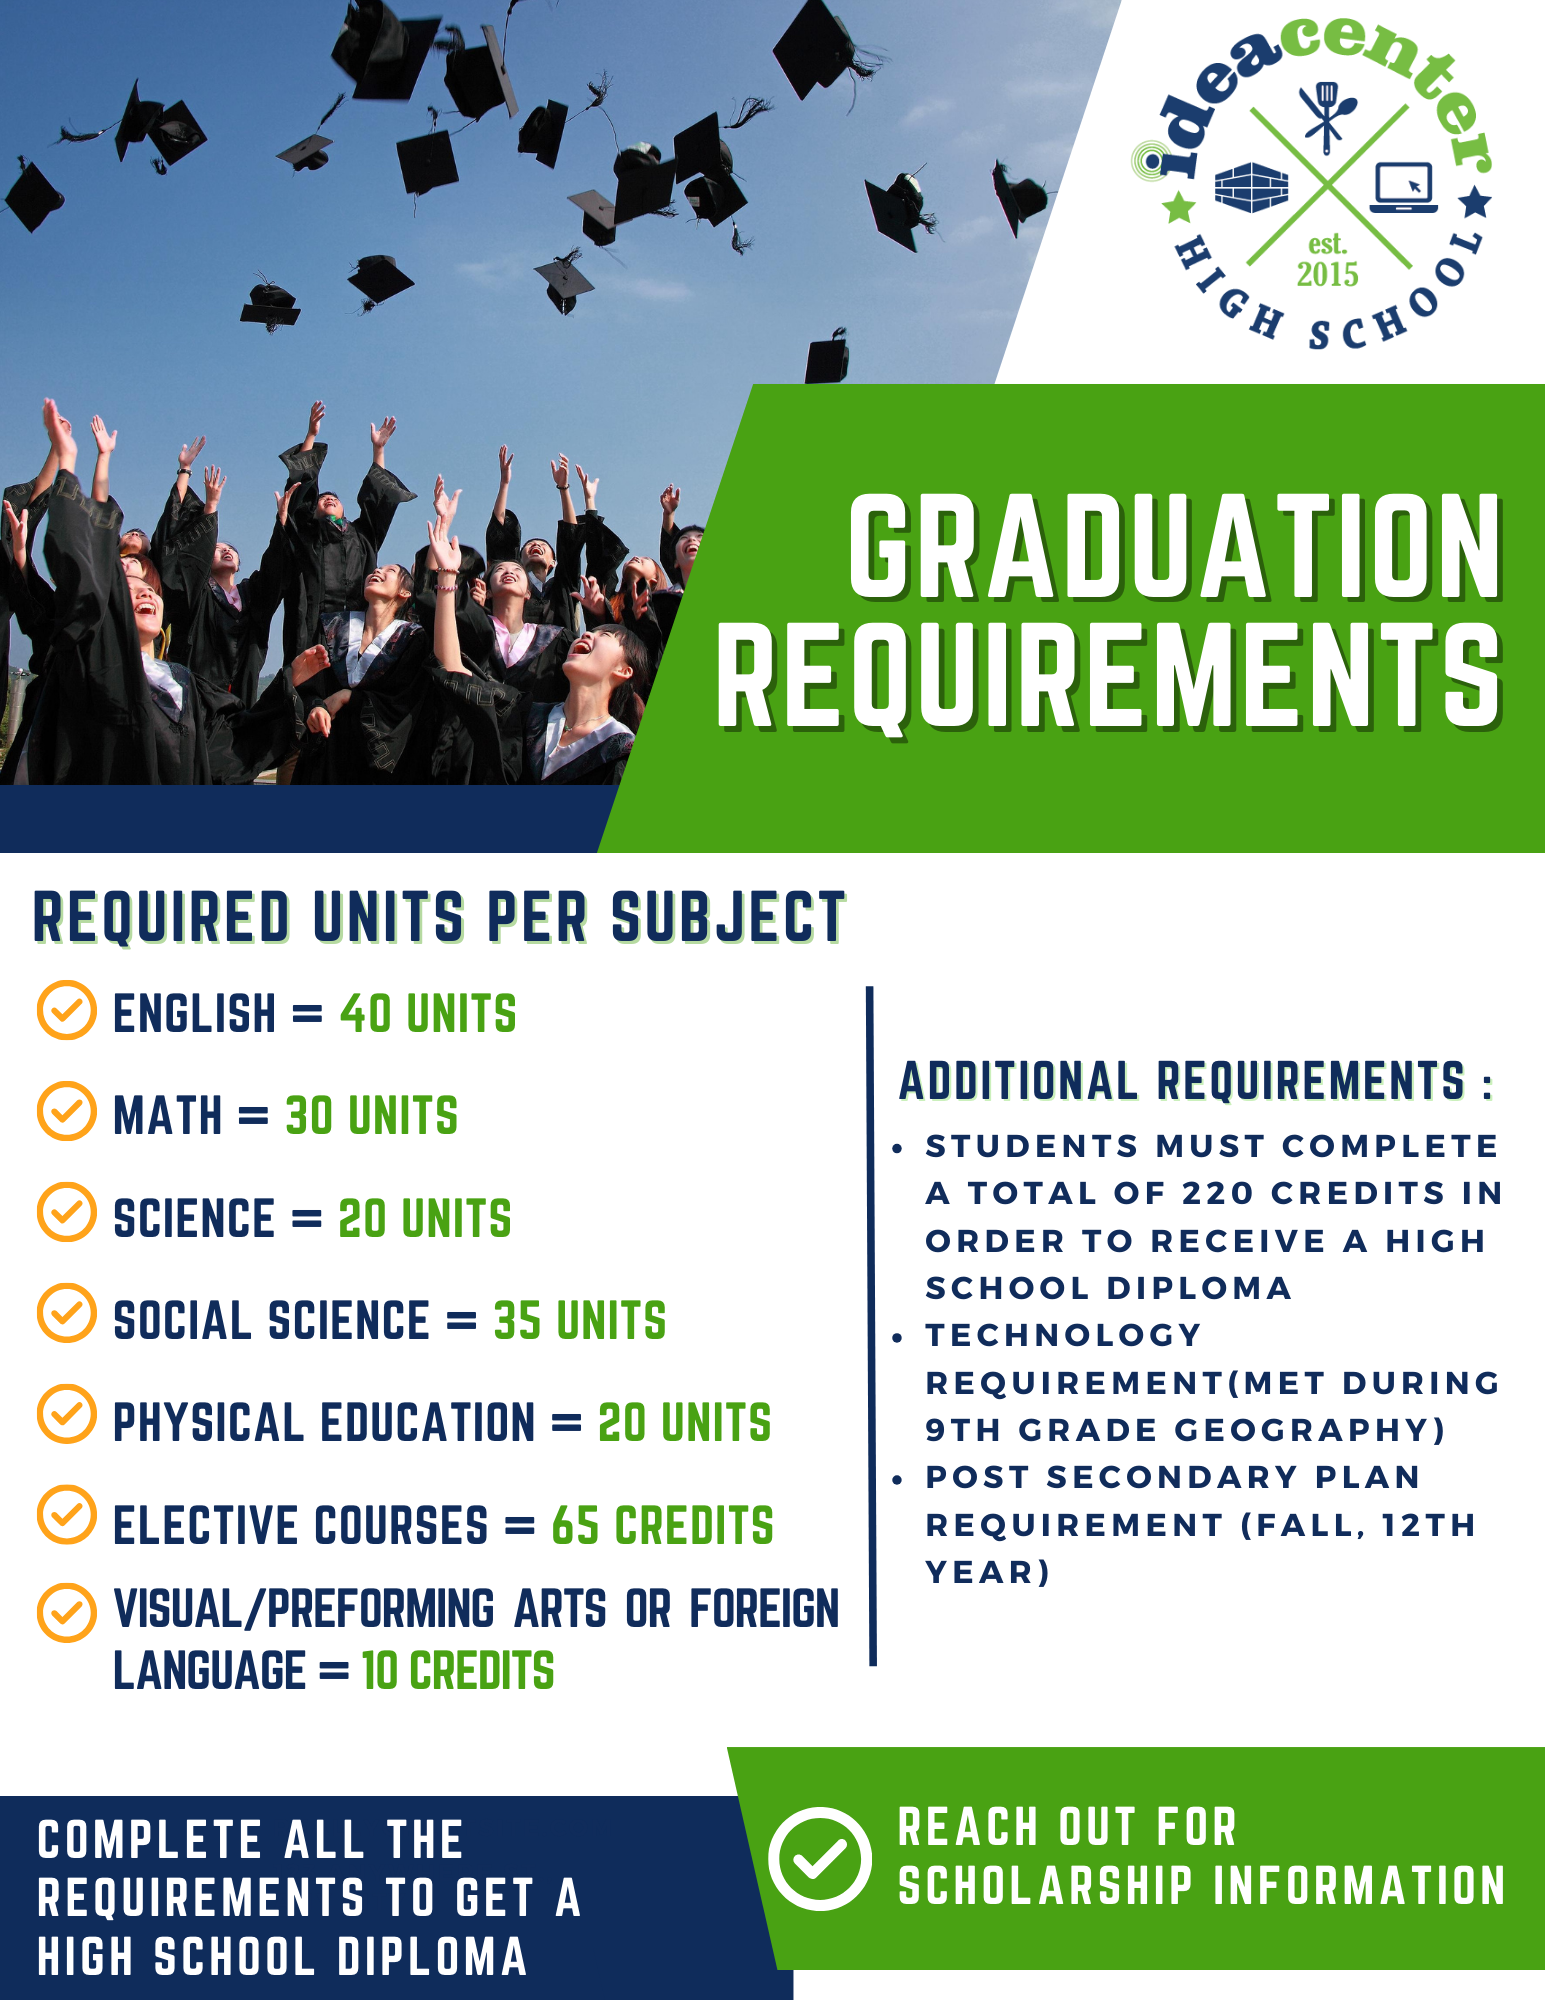 grad unit requirements to get a high school diploma: english = 40 units math = 30 units science = 20 units social science = 35 units physical education = 20 units Elective courses = 65 credits visual/preforming arts or foreign language = 10 credits